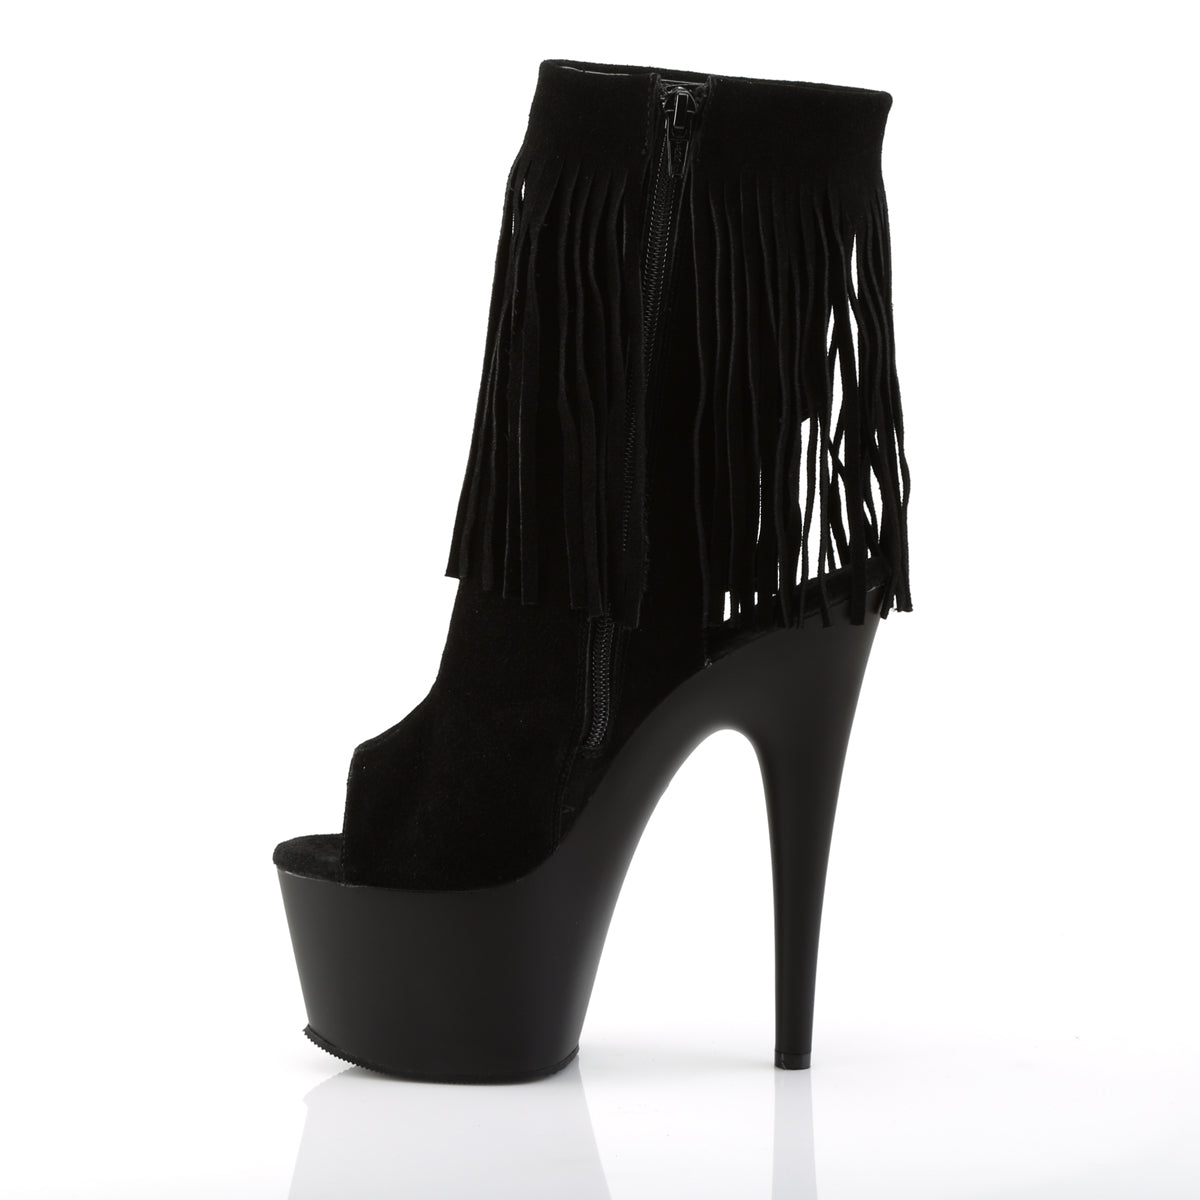 ADORE-1019 7 Inch Heel Black Suede Exotic Dancing Ankle Boot-Pleaser- Sexy Shoes Pole Dance Heels